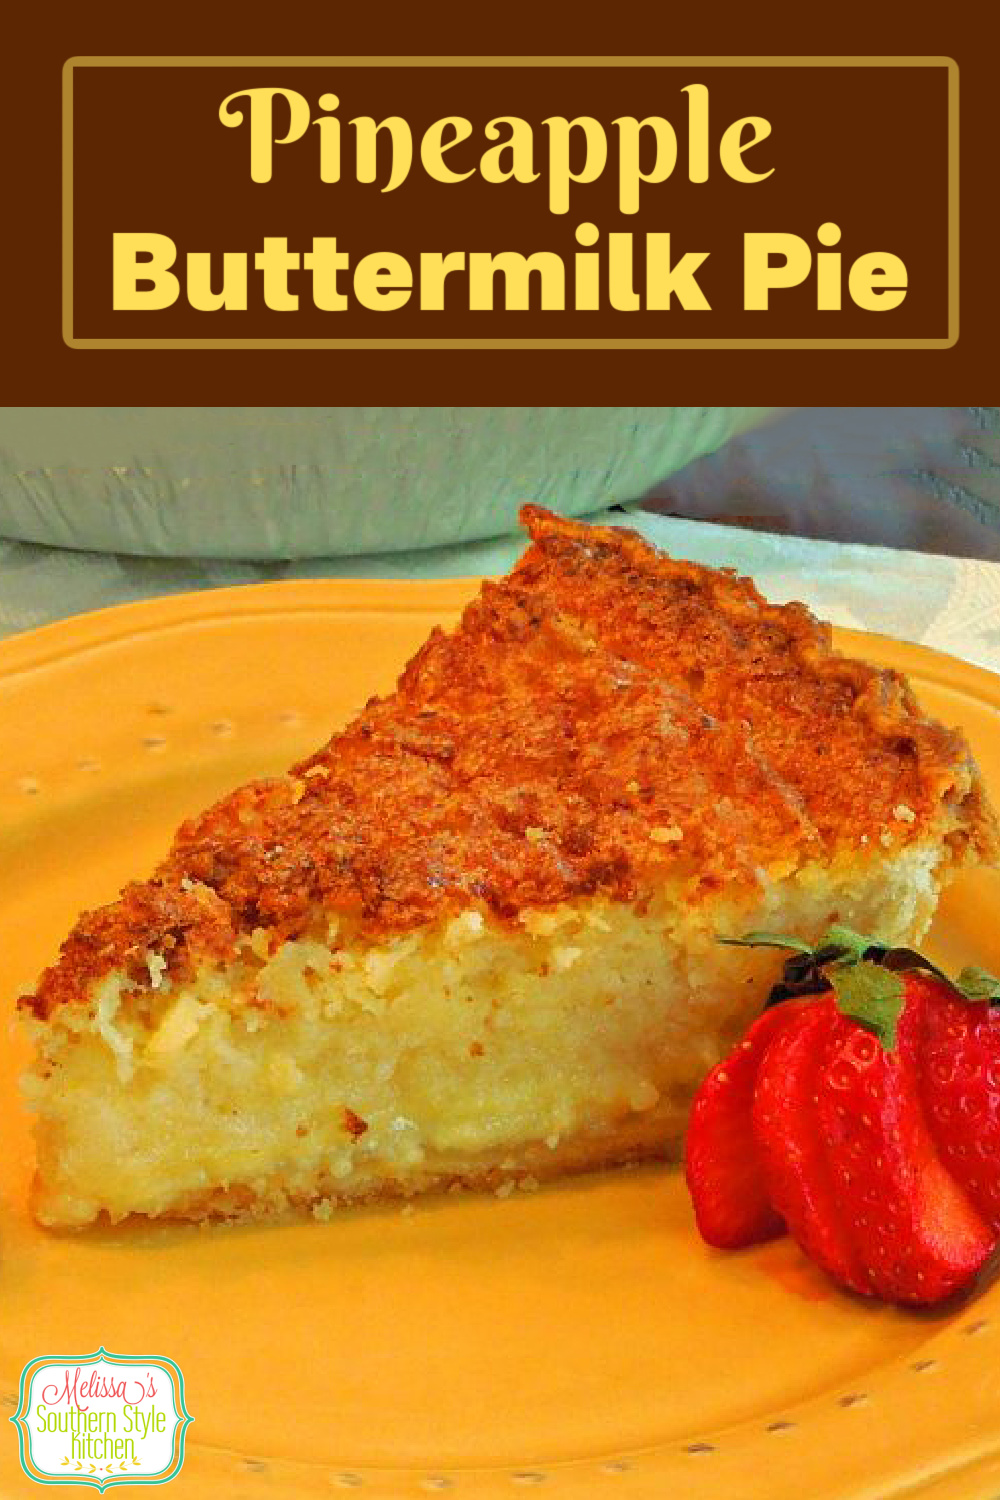 Enjoy a big piece of this Southern Pineapple Buttermilk Pie with whipped cream and fresh berries for dessert #pineapplepie #pineapplebuttermilkpie #southernbuttermilkpie #buttermilkpie #pierecipes #southerndesserts #pierecipes #southernfood #southernrecipes #fallbaking #holidaybaking #thanksgiving